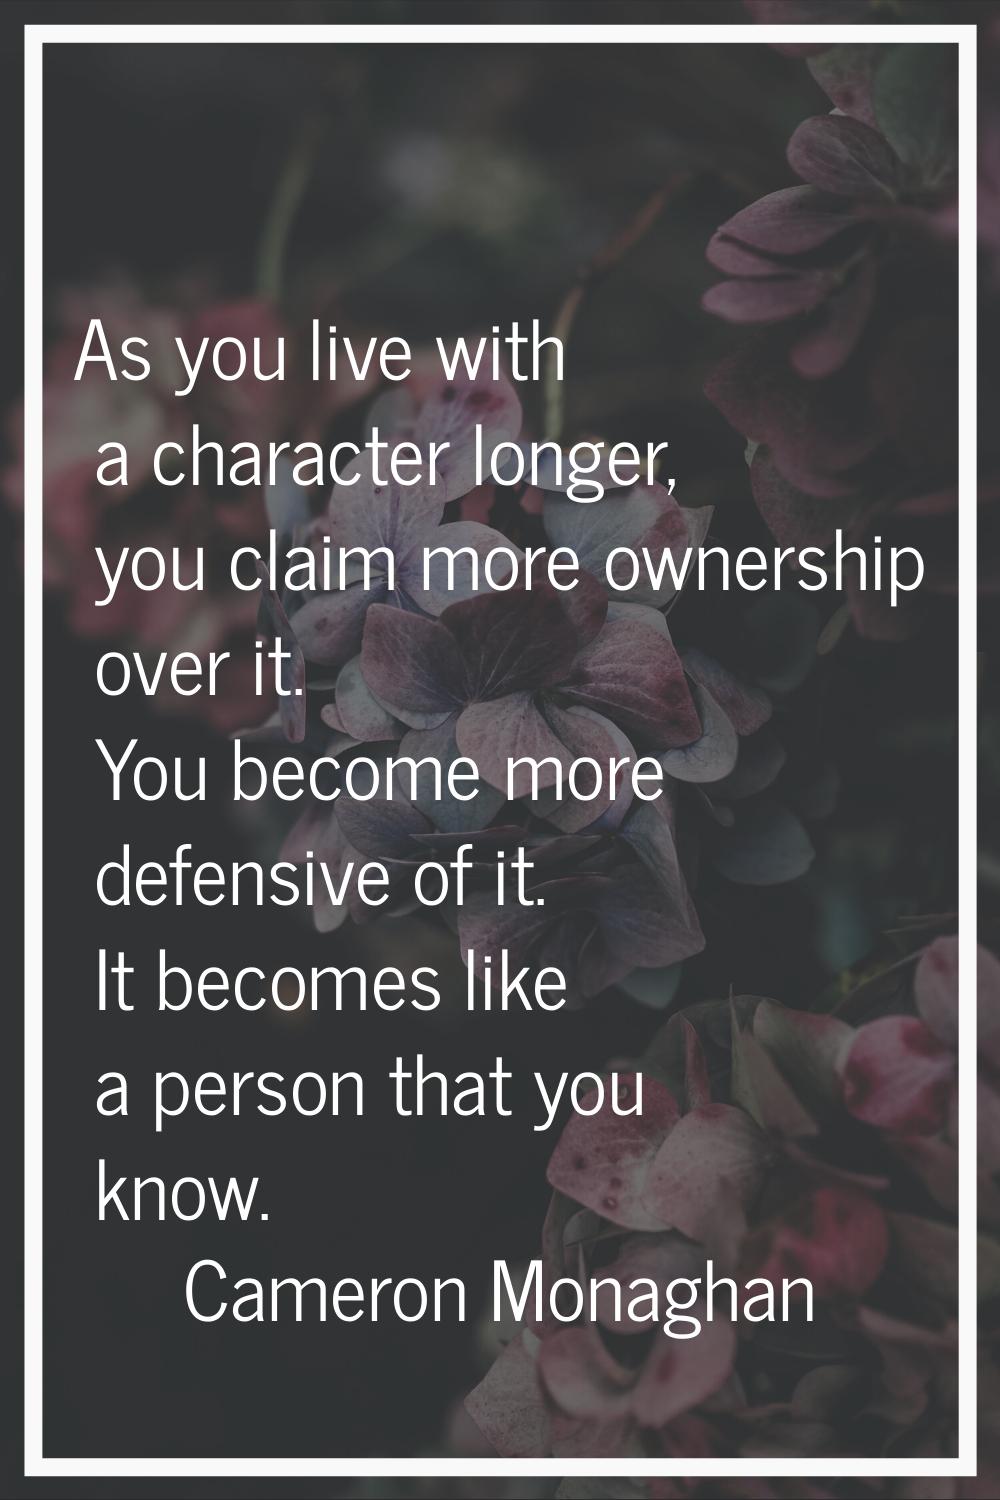 As you live with a character longer, you claim more ownership over it. You become more defensive of